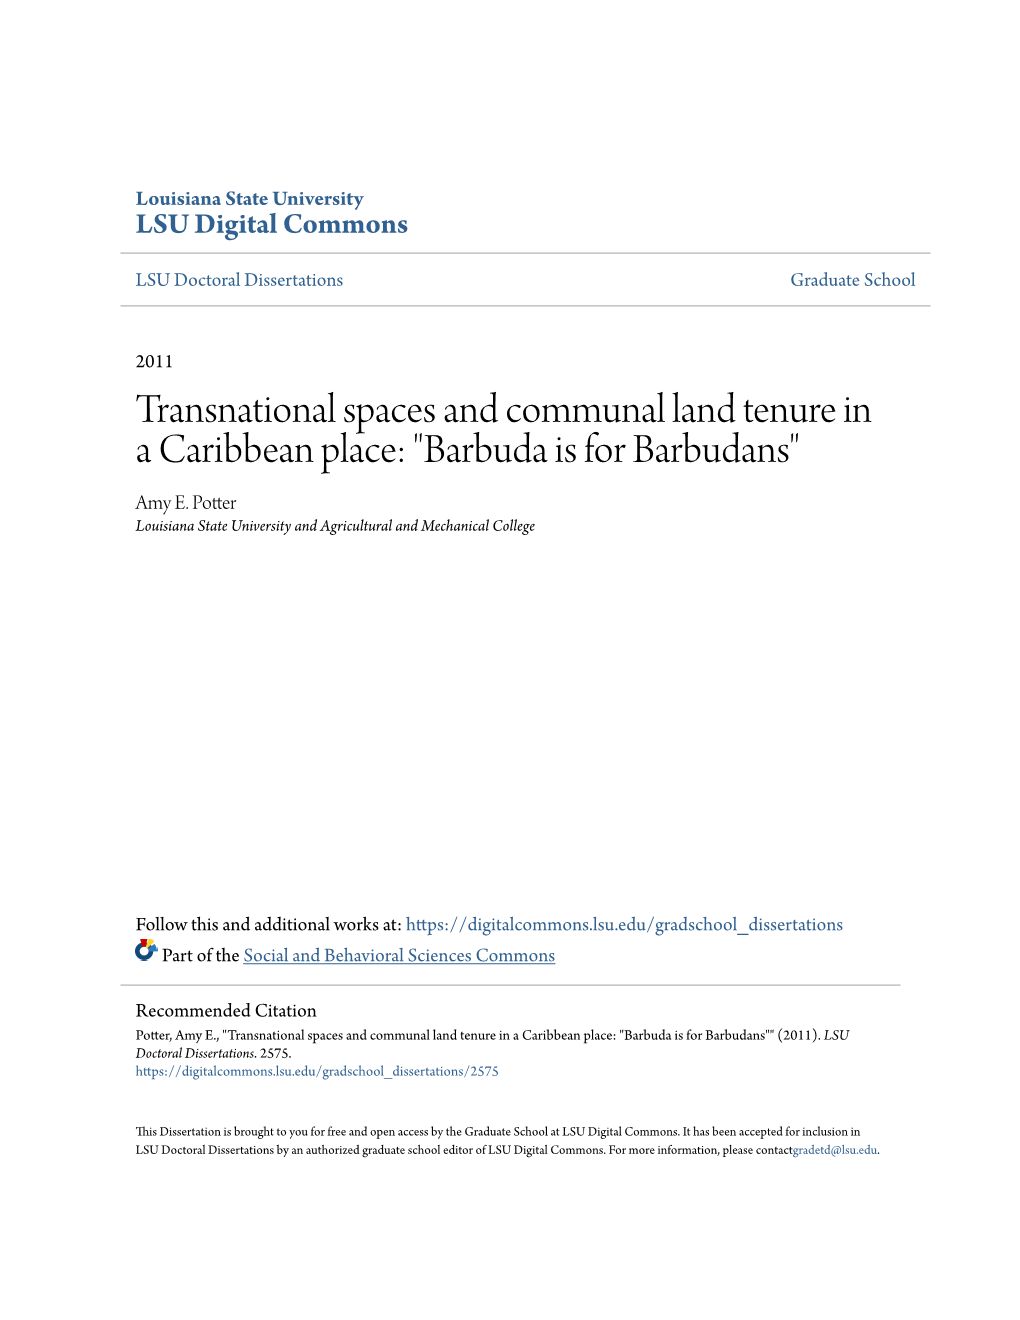 Transnational Spaces and Communal Land Tenure in a Caribbean Place: "Barbuda Is for Barbudans" Amy E